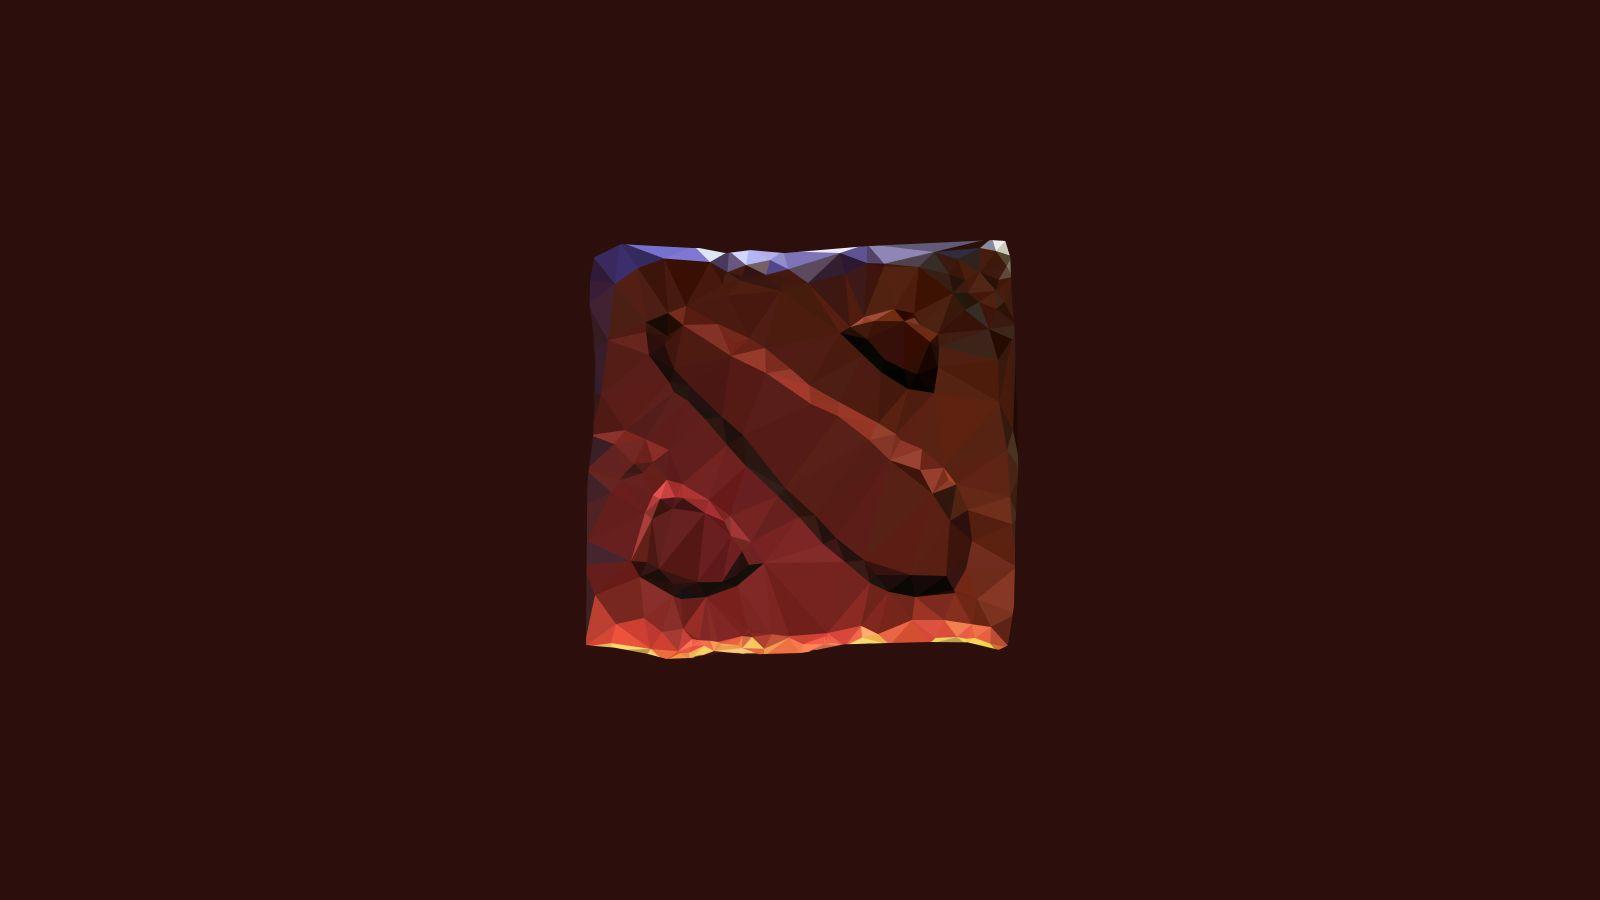 I Made A Low Poly Dota 2 Logo Wallpaper For You Guys In Memory